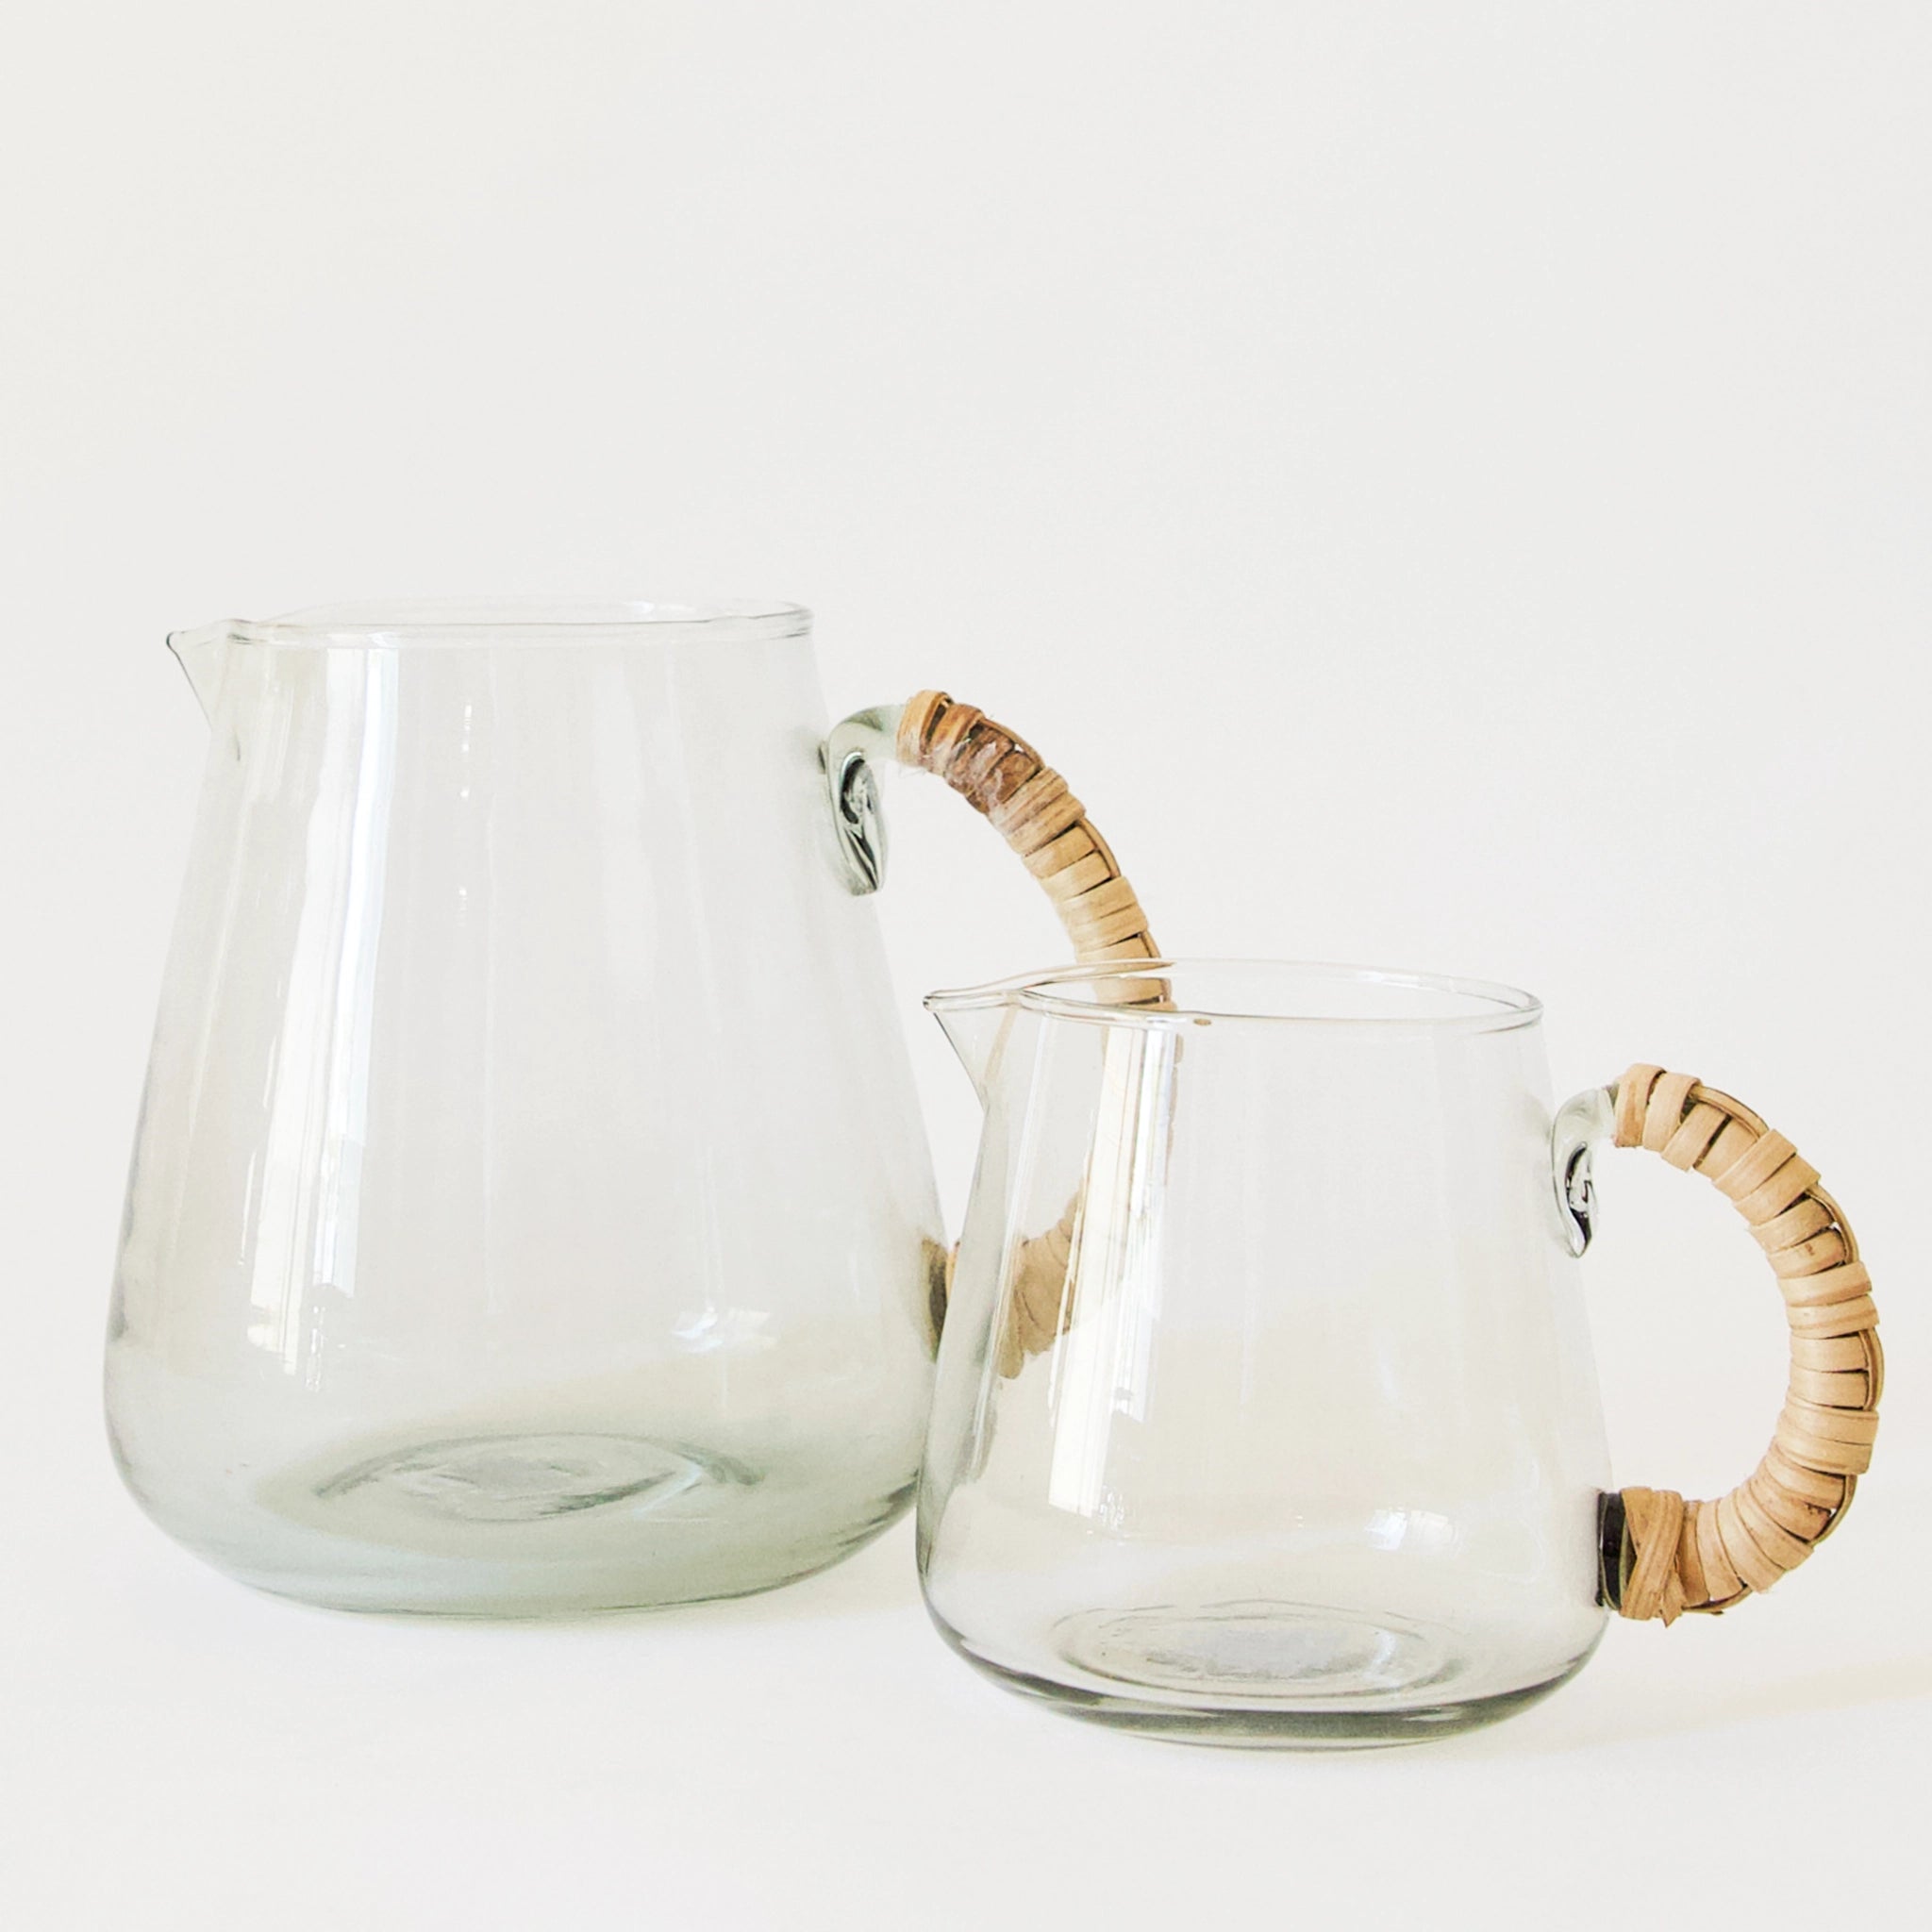 Two glass pitchers, one small and one large, sit side by side. the pitchers have rattan wrapped handles.